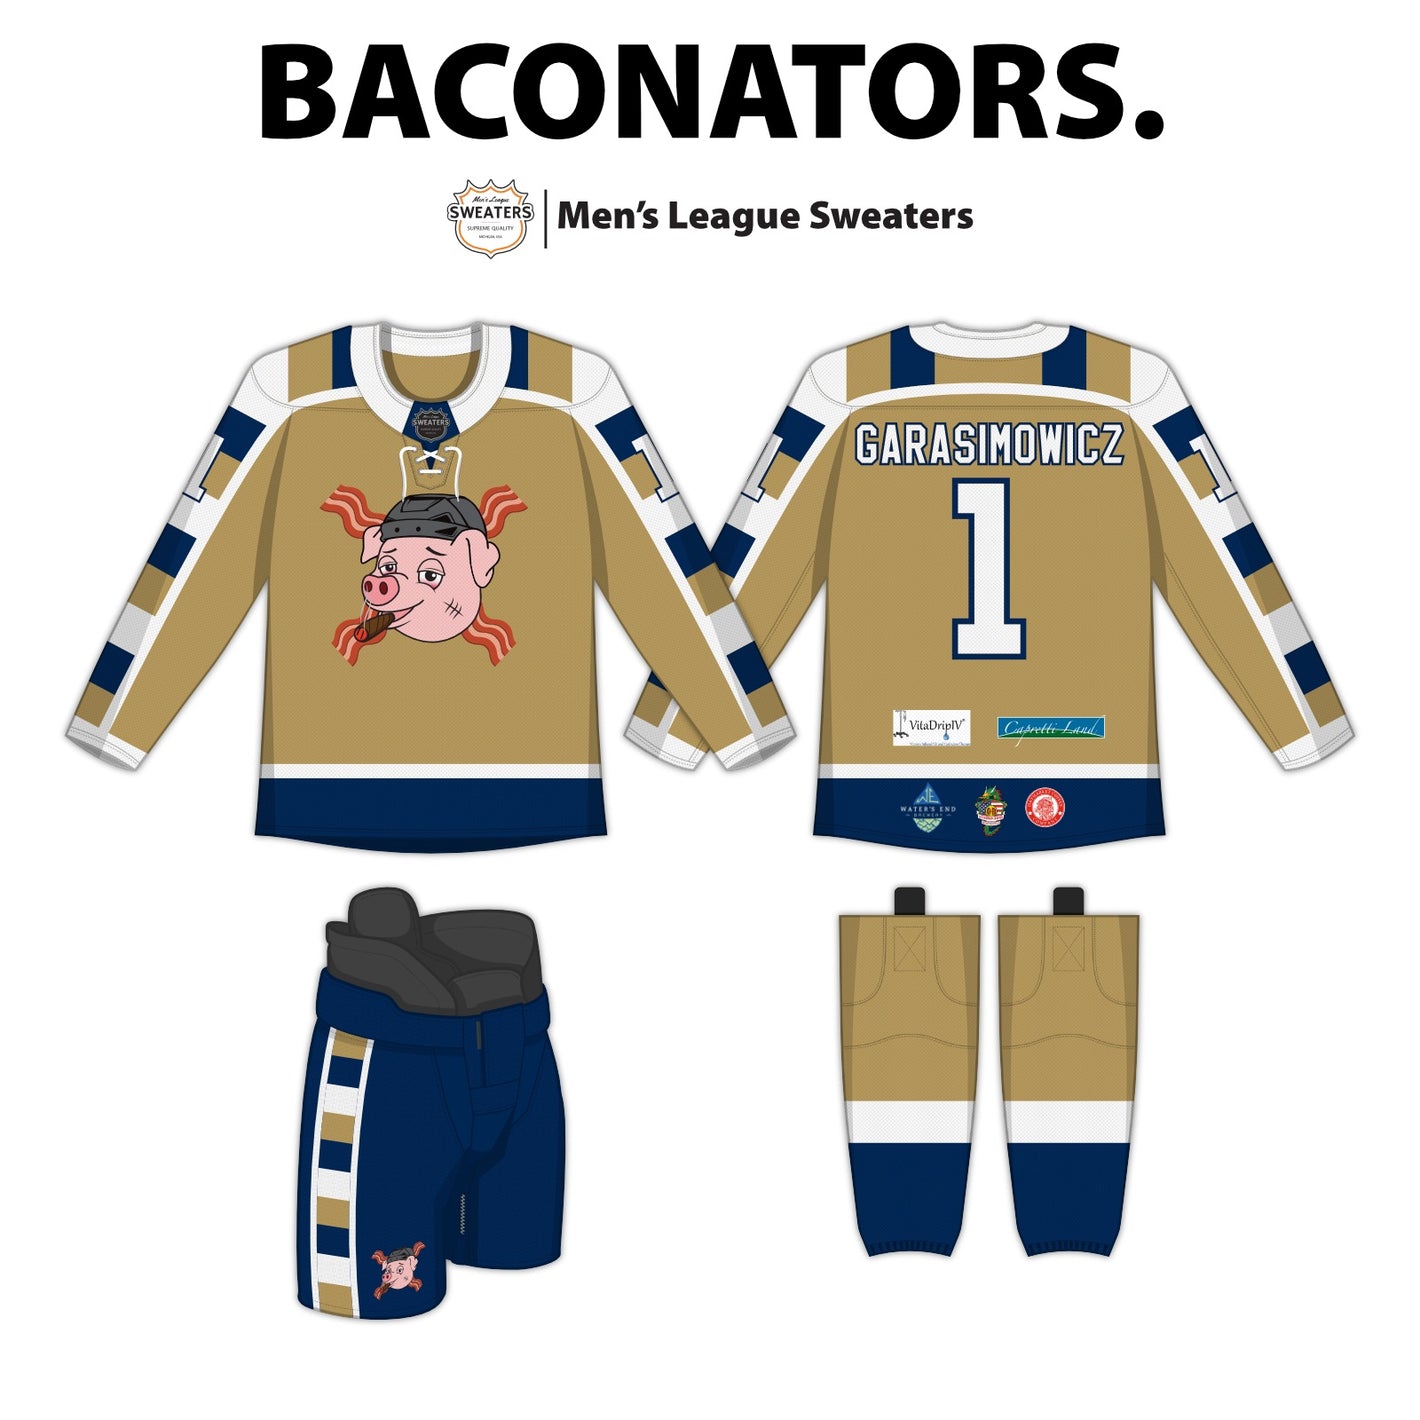 Men's League Sweaters (@mensleaguesweaters) • Instagram photos and